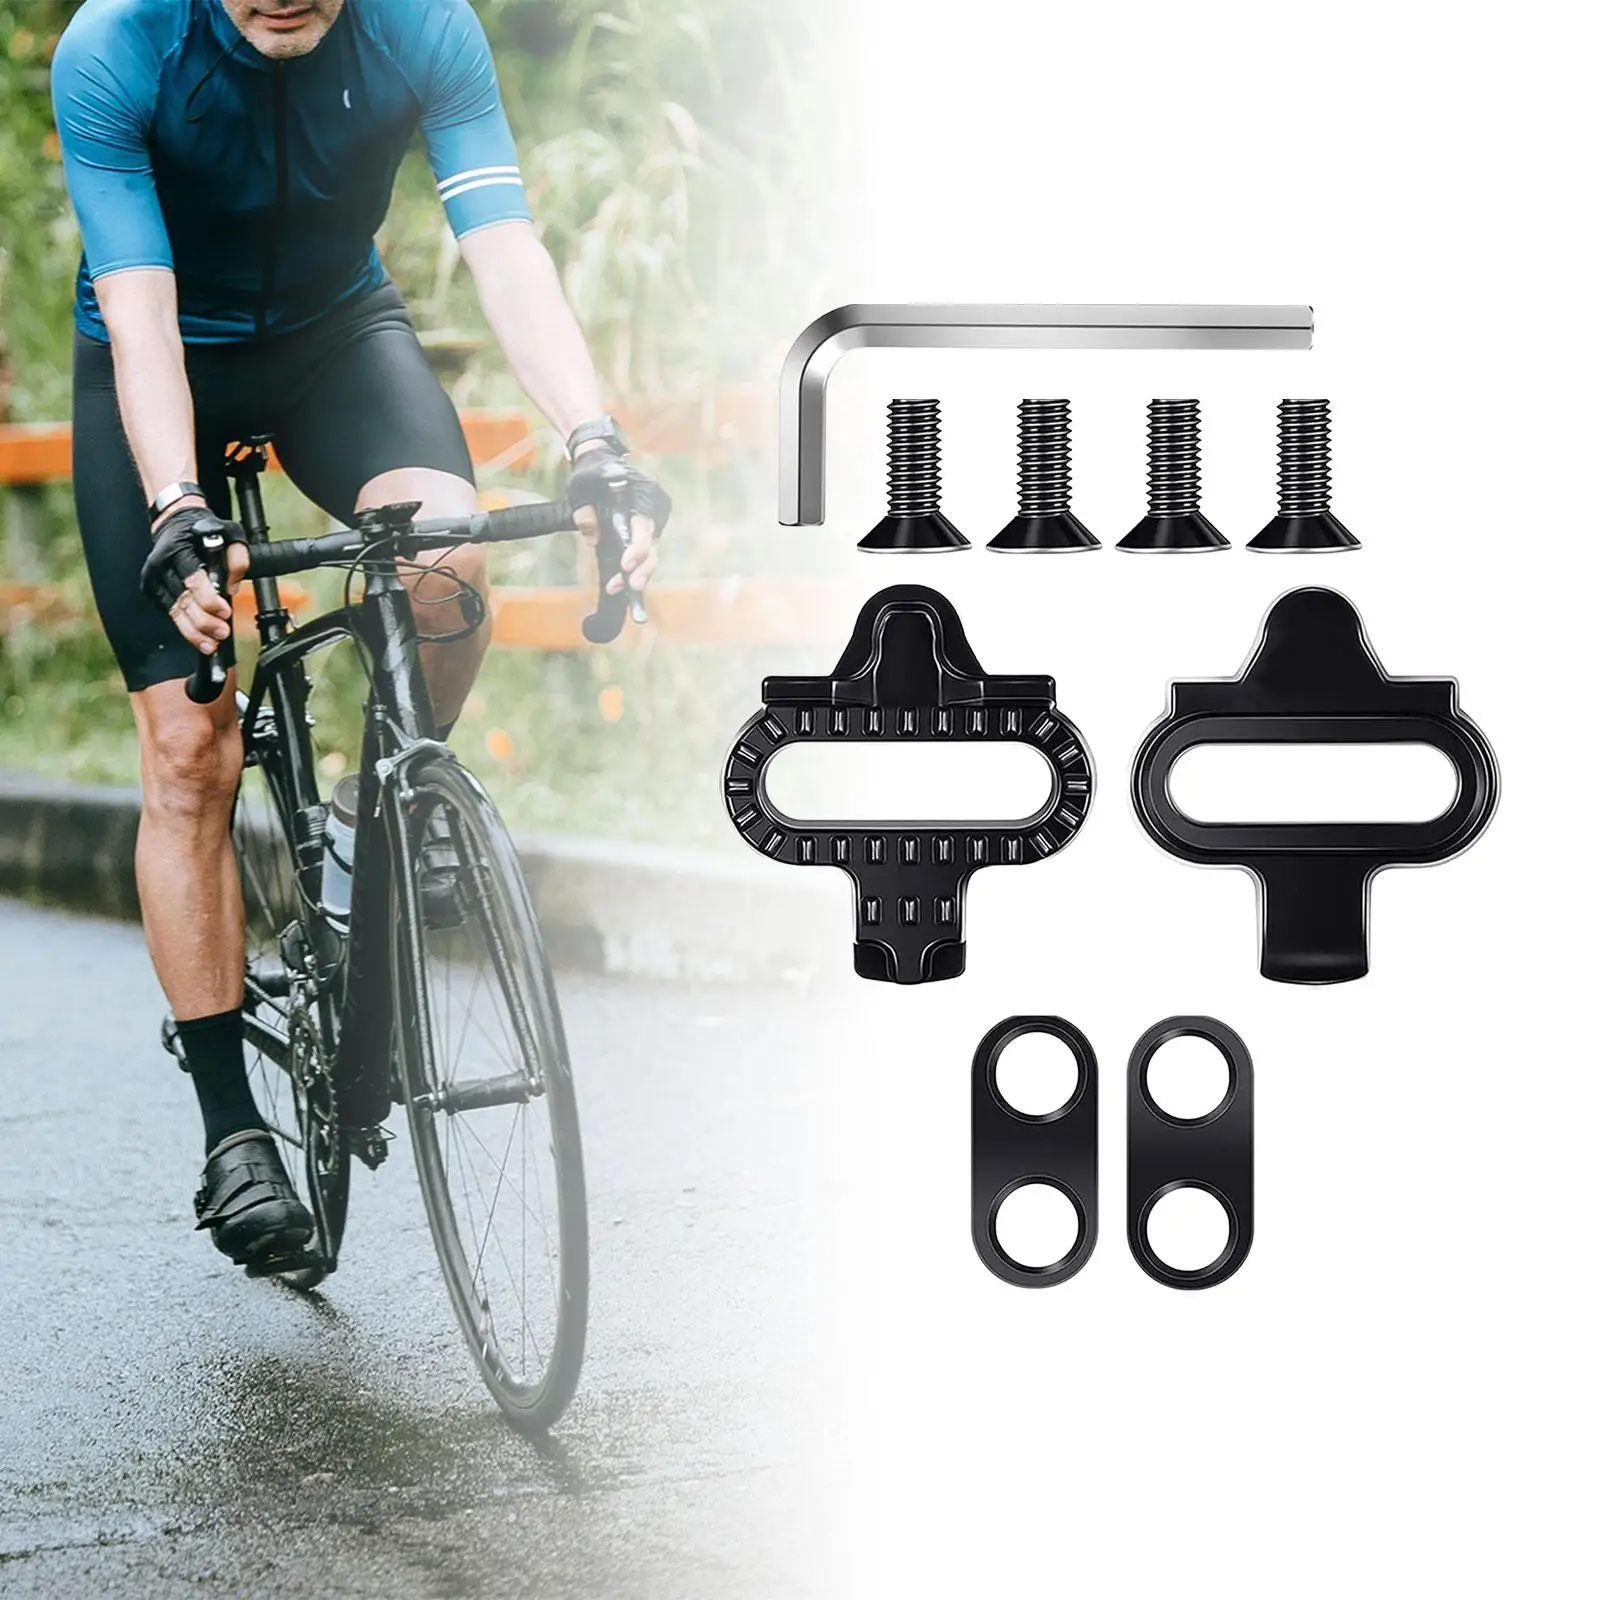 Bicycle Pedals Cleats Cycling Parts Stable Anti Slip Mountain Bikes Wear Resistant SPD System Cleat Bike Shoes Cleats Locking